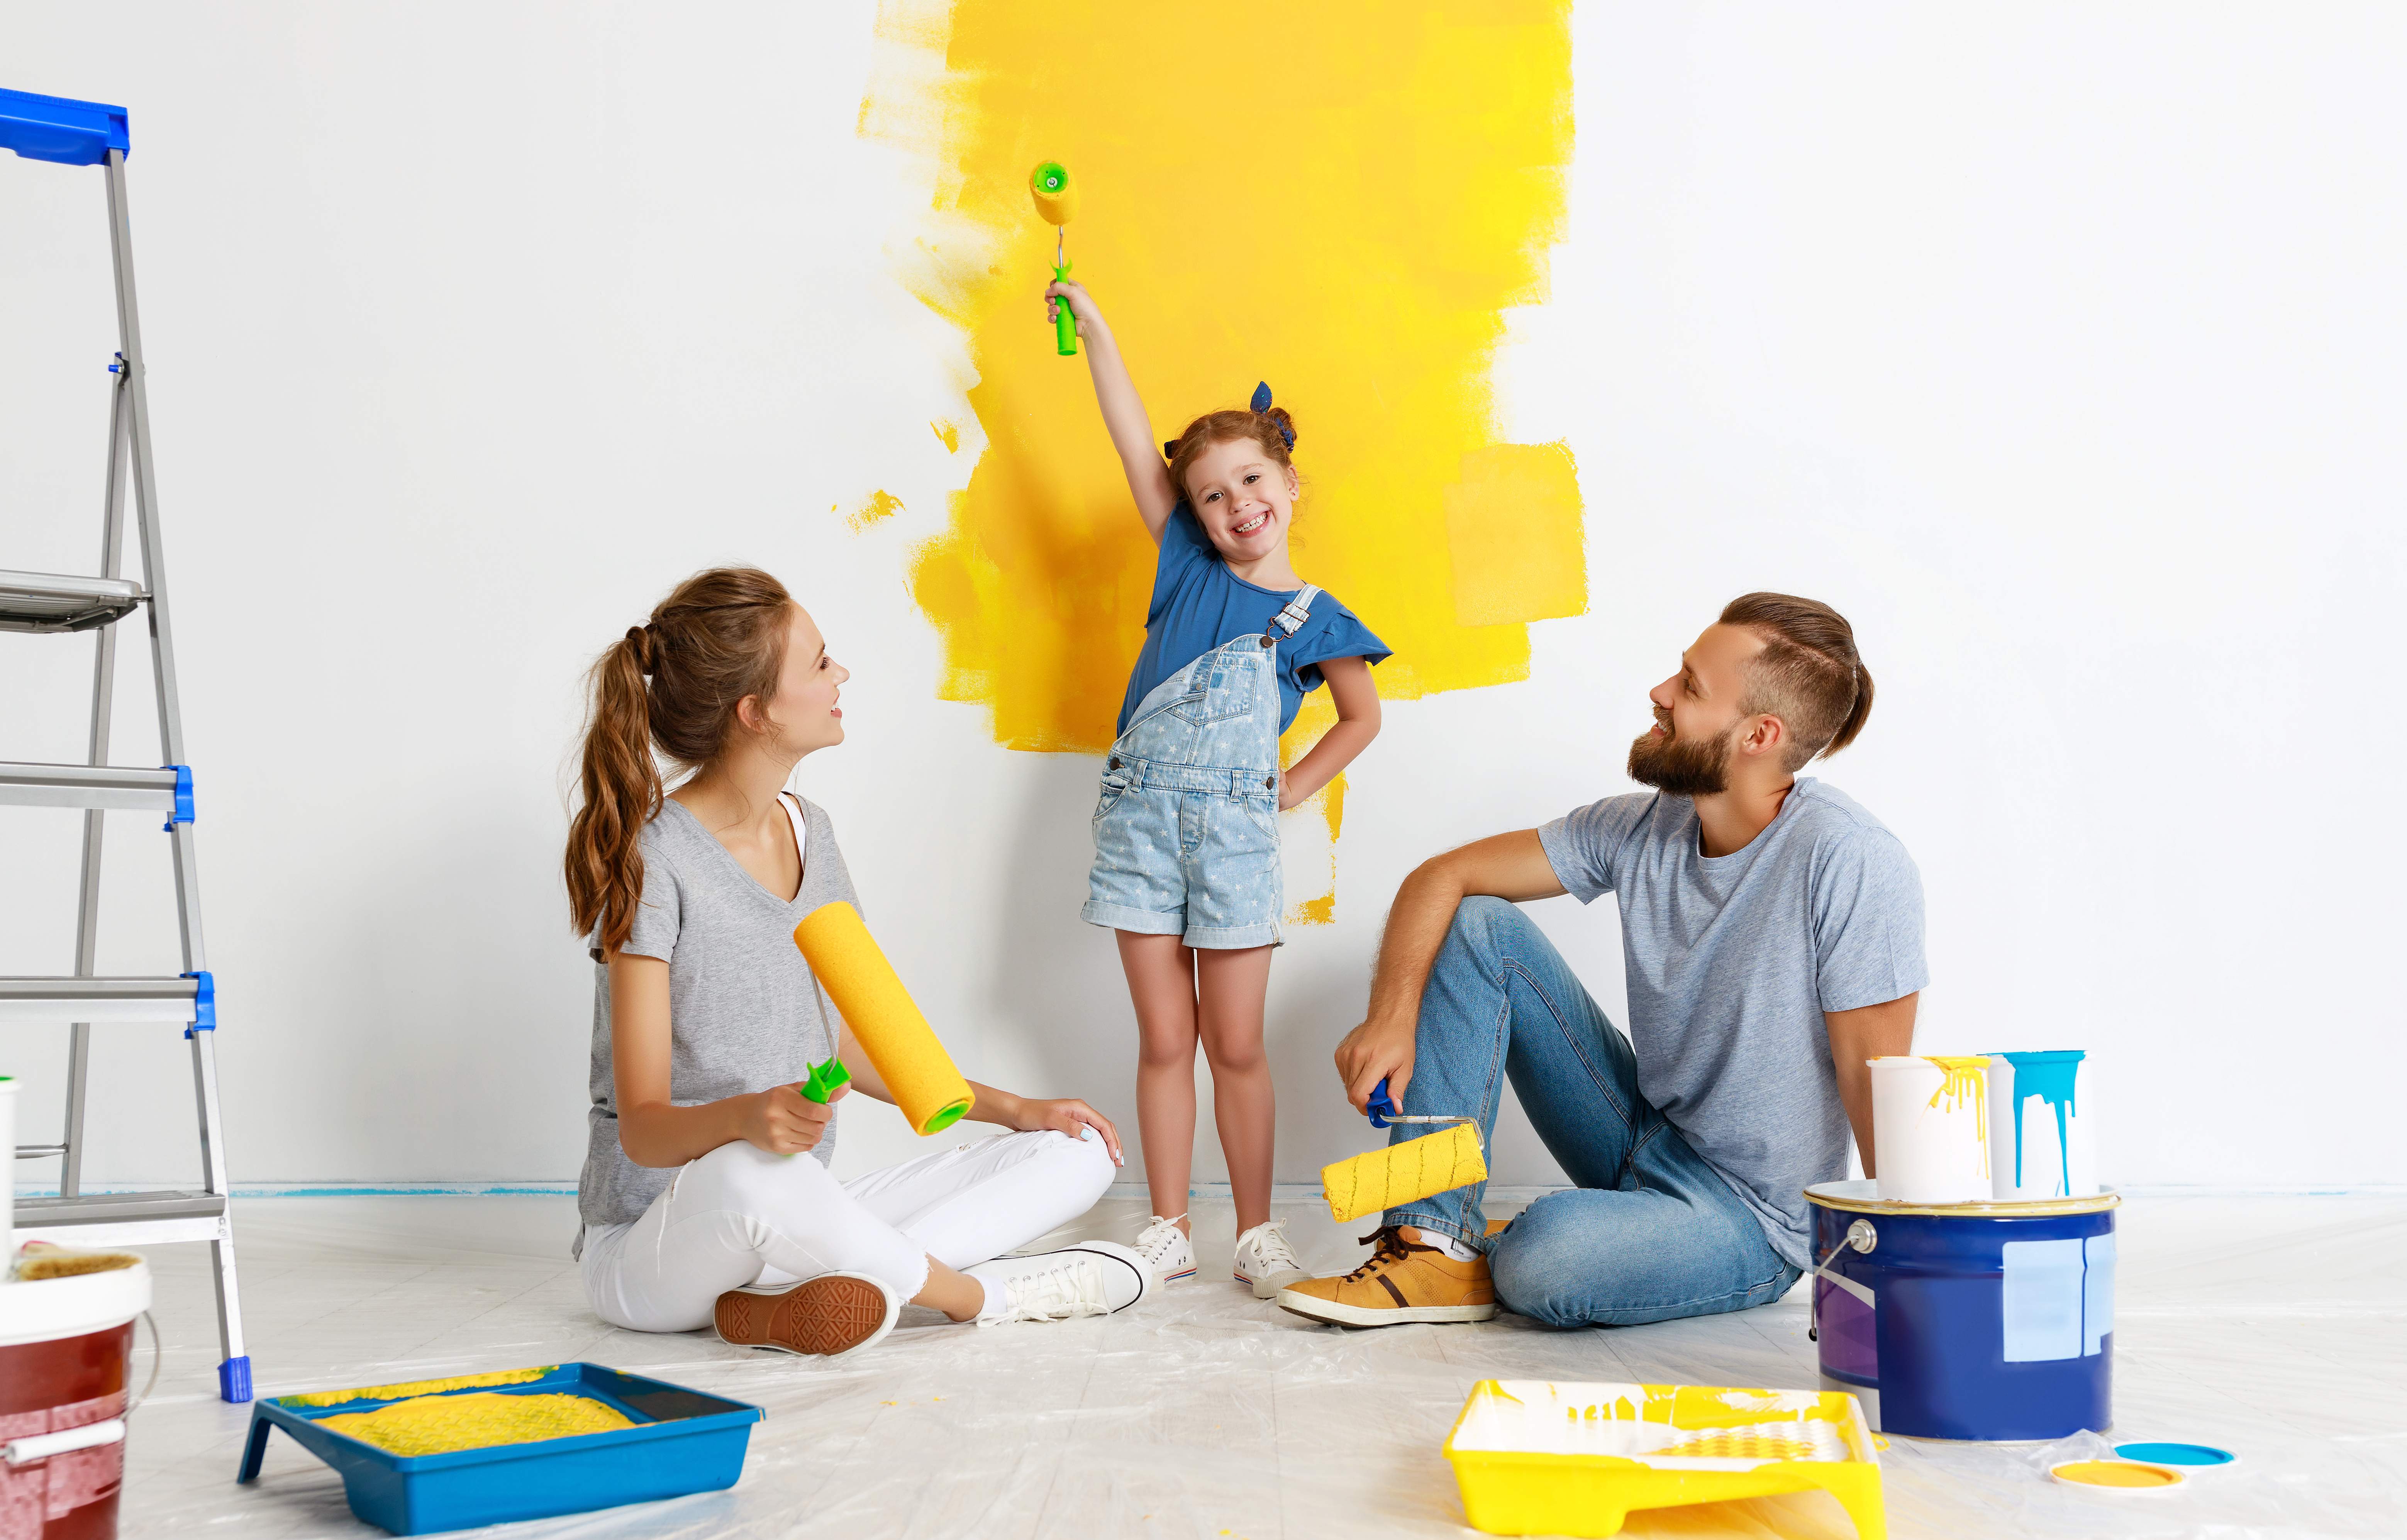 Coatings Industry family painting Safic-Alcan eurocoat